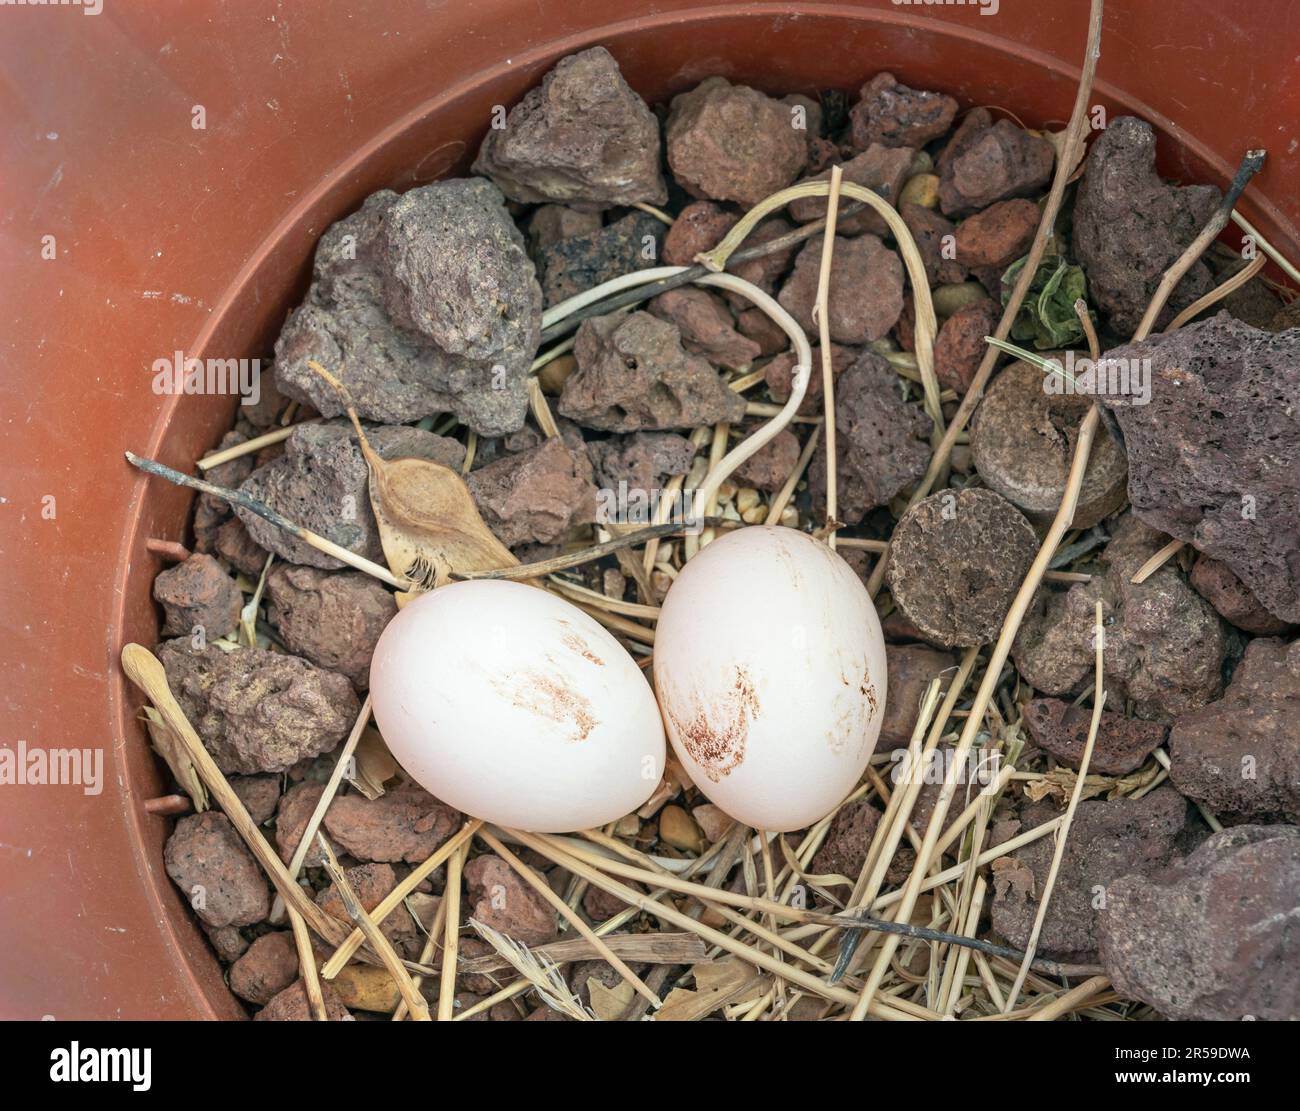 two freshly laid pigeon eggs in an empty plant pot on a stick nest among lava pebbles and wine cork slices Stock Photo